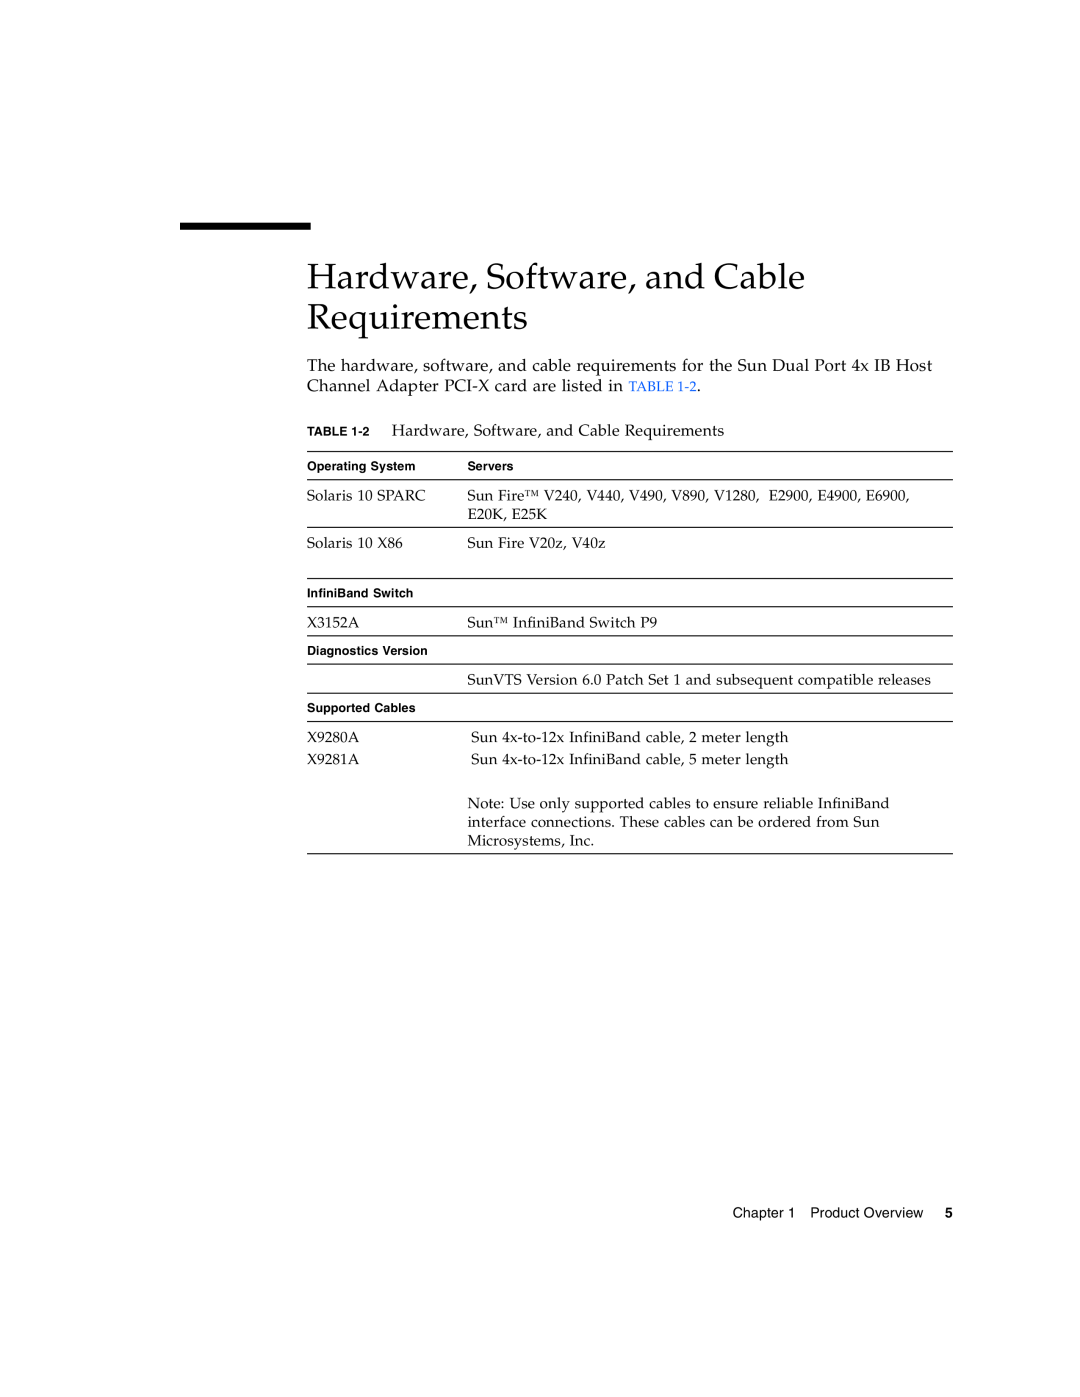 Sun Microsystems PCI manual 2 Hardware, Software, and Cable Requirements 